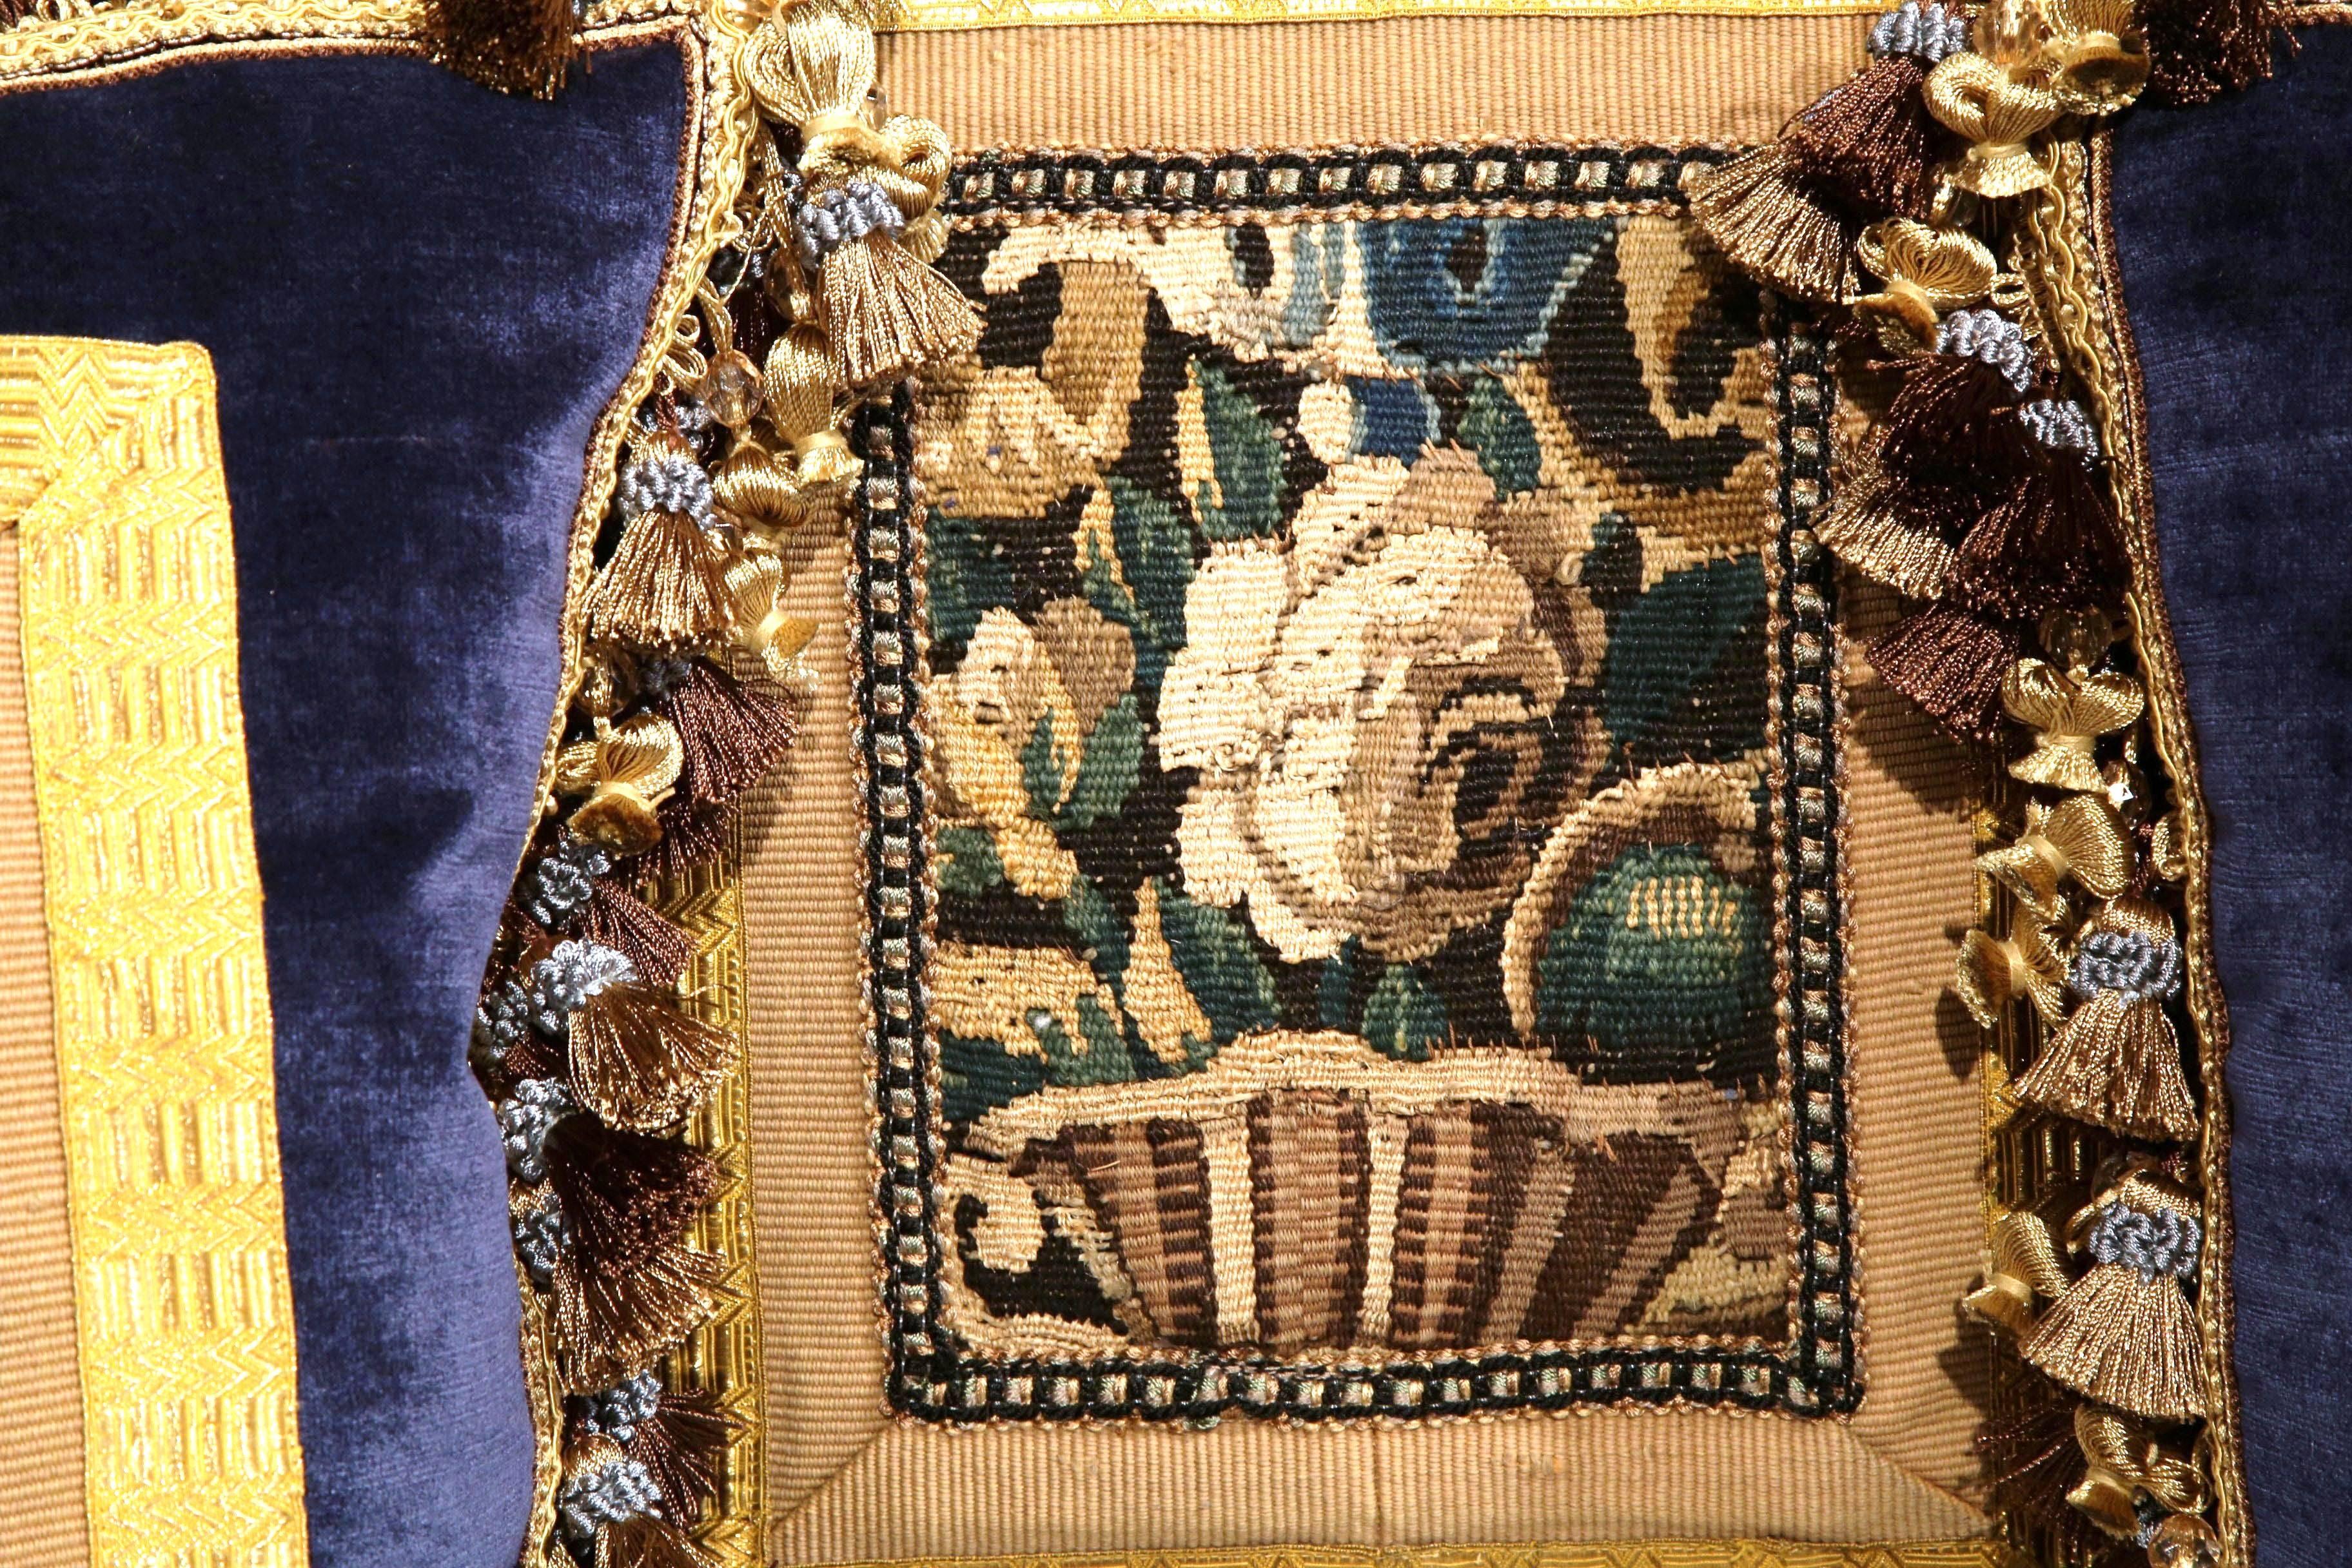 18th Century Set of Three Handmade Pillows with Aubusson Tapestry and Antique Trims